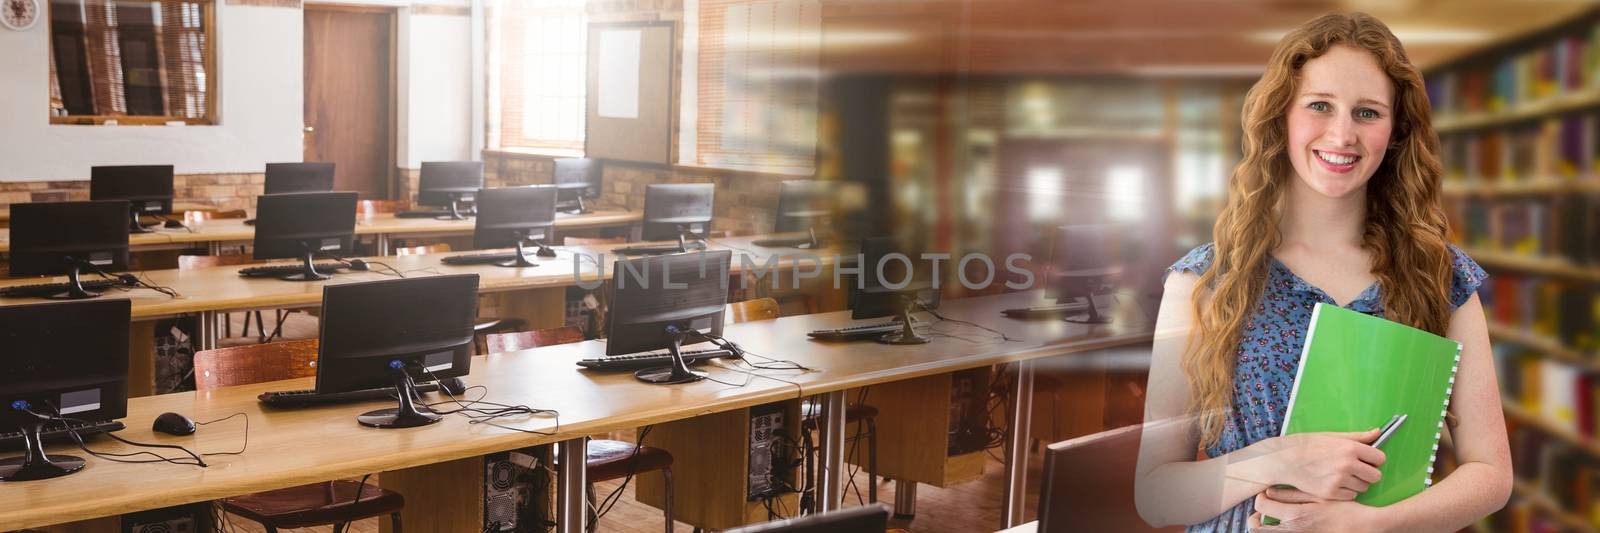 Digital composite of Student woman in education library with computer study transition